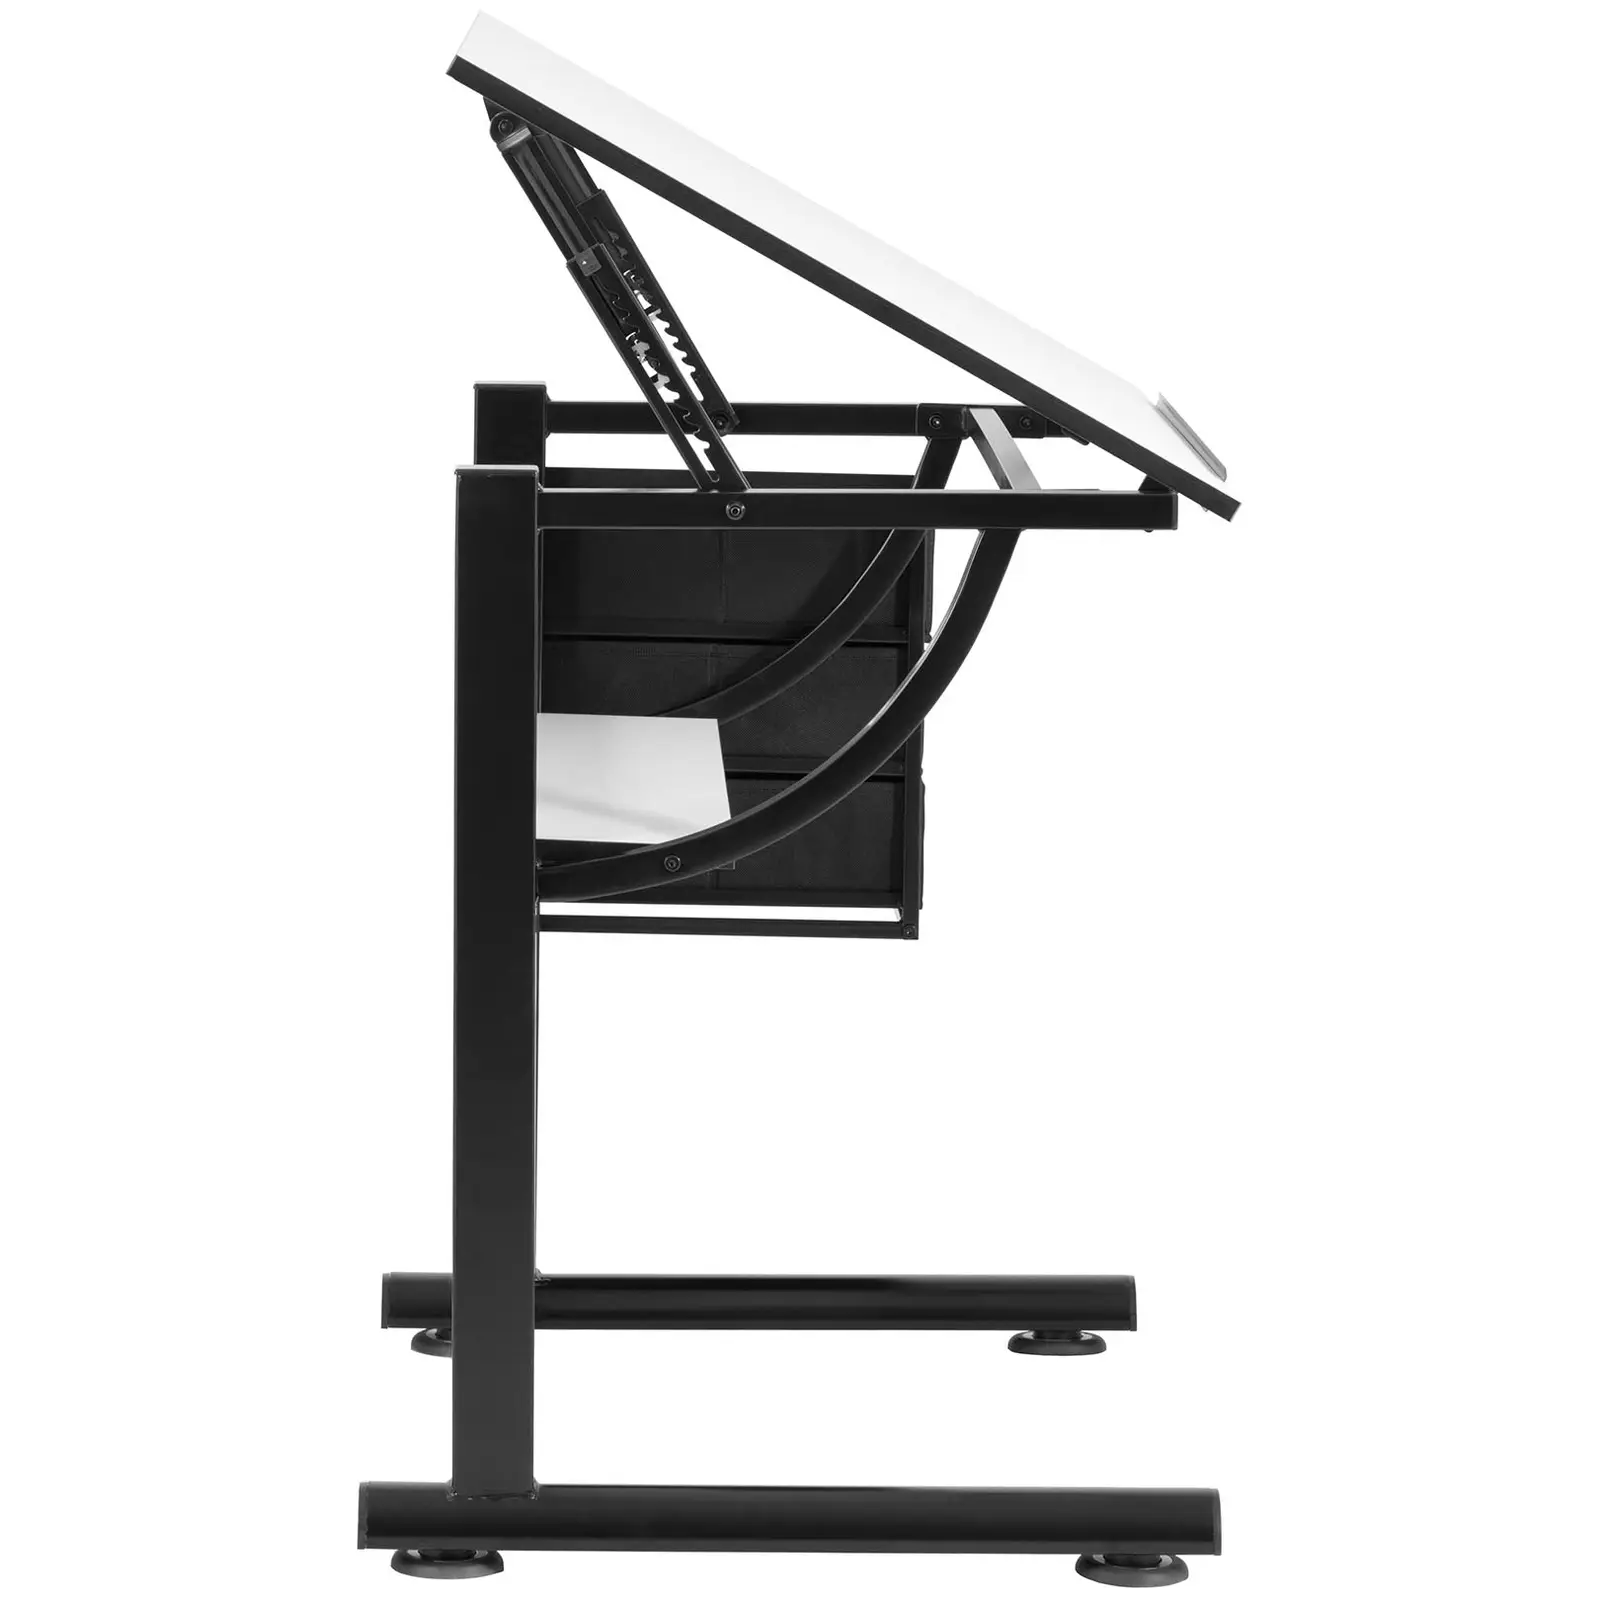 Drawing table with stool for architects and artists - 900 x 600 mm - drawers